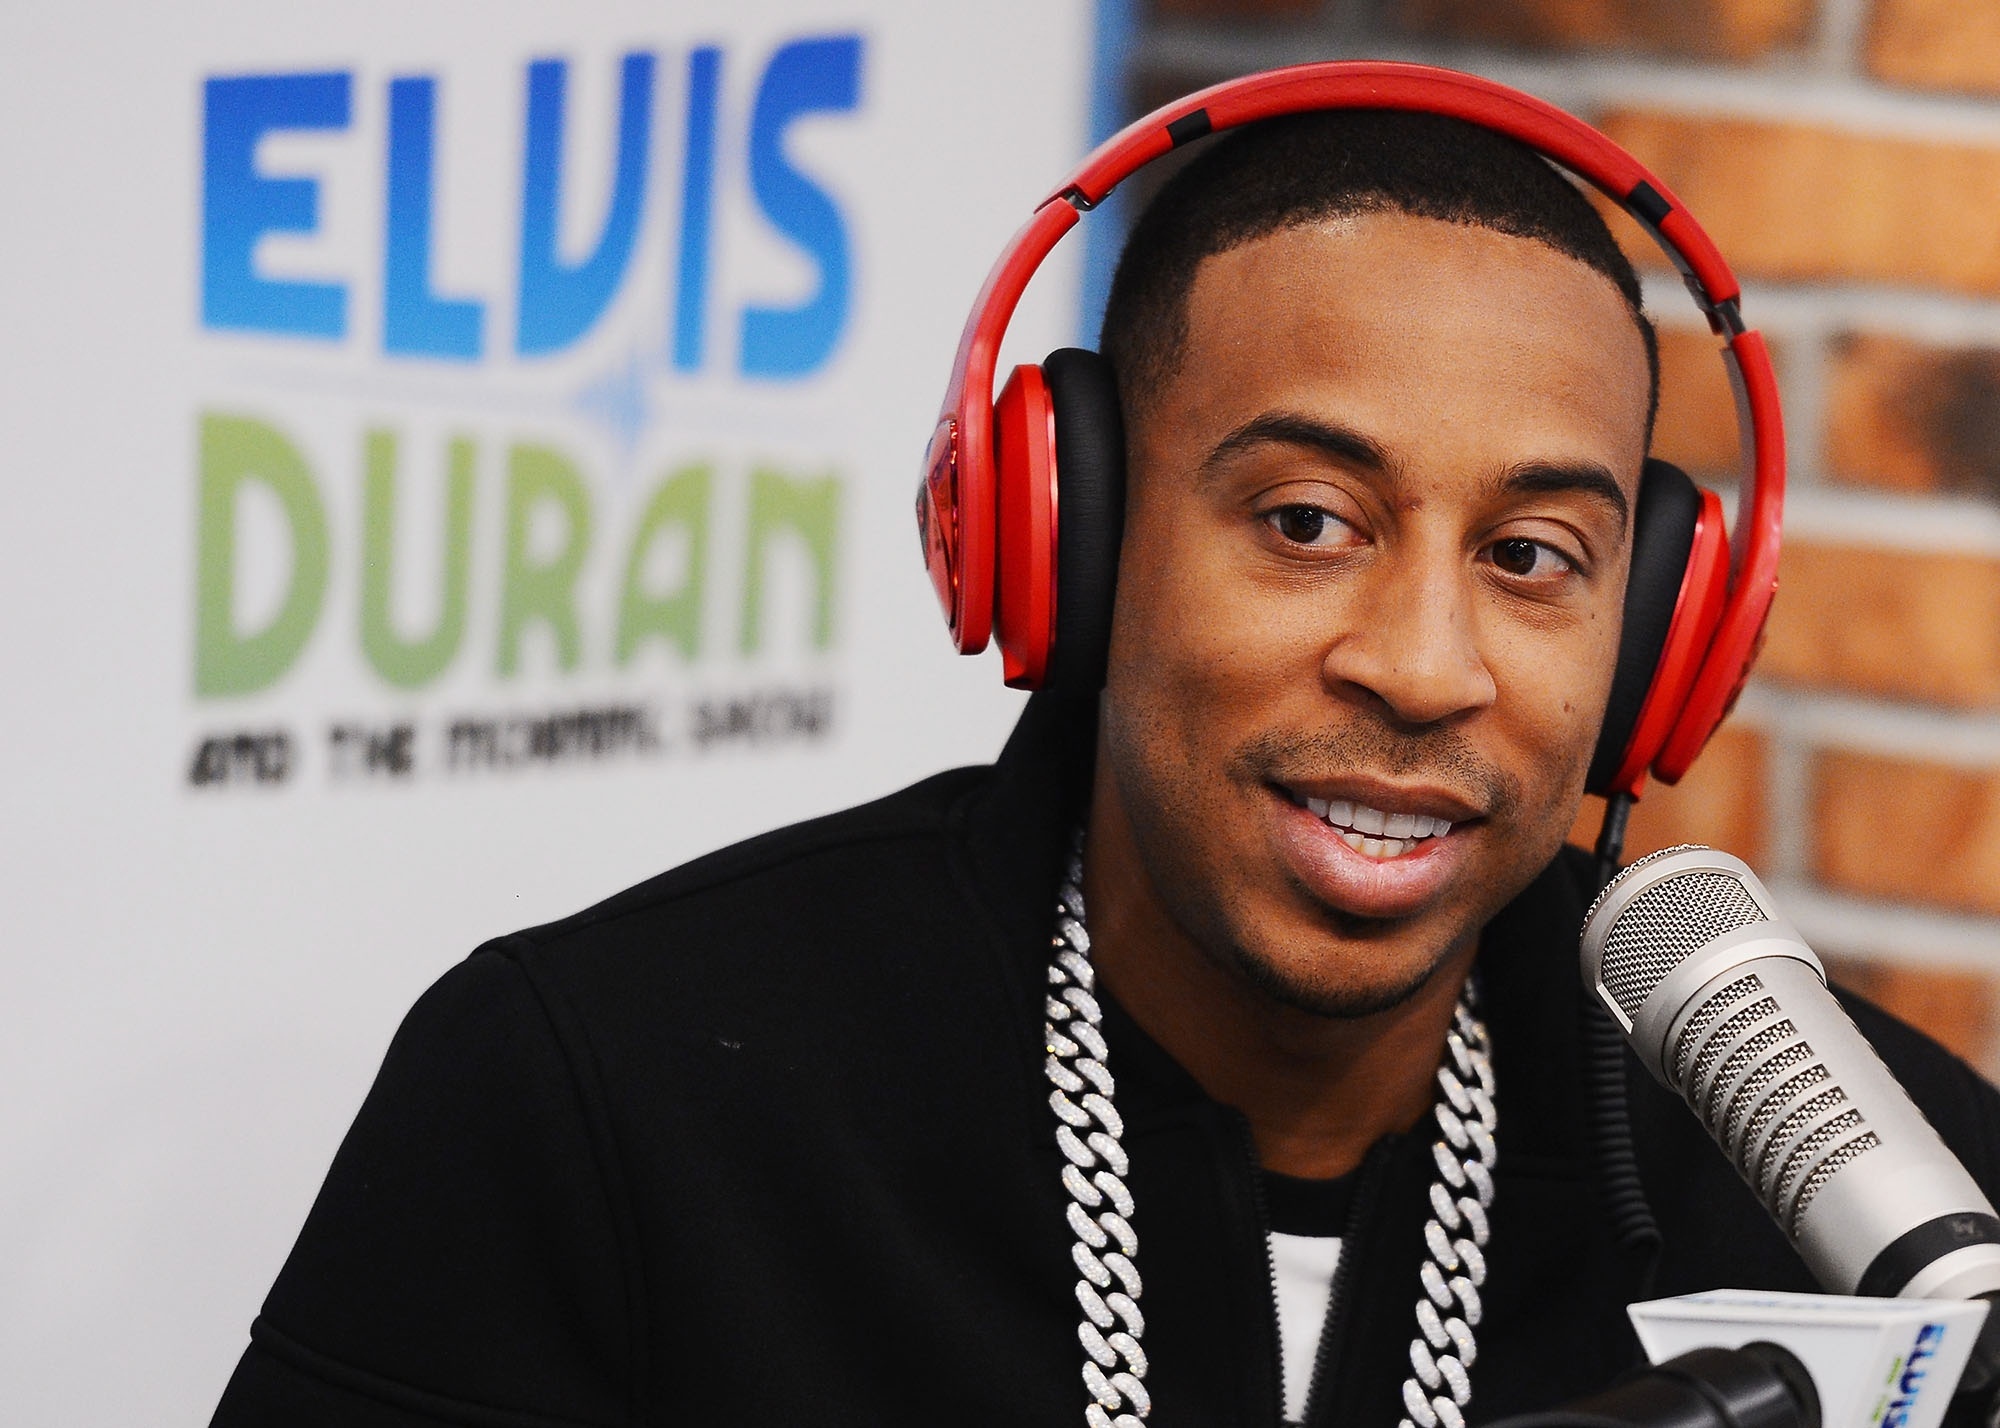 Ludacris movies, High definition wallpapers, Vibrant colors, Exciting visuals, 2000x1430 HD Desktop